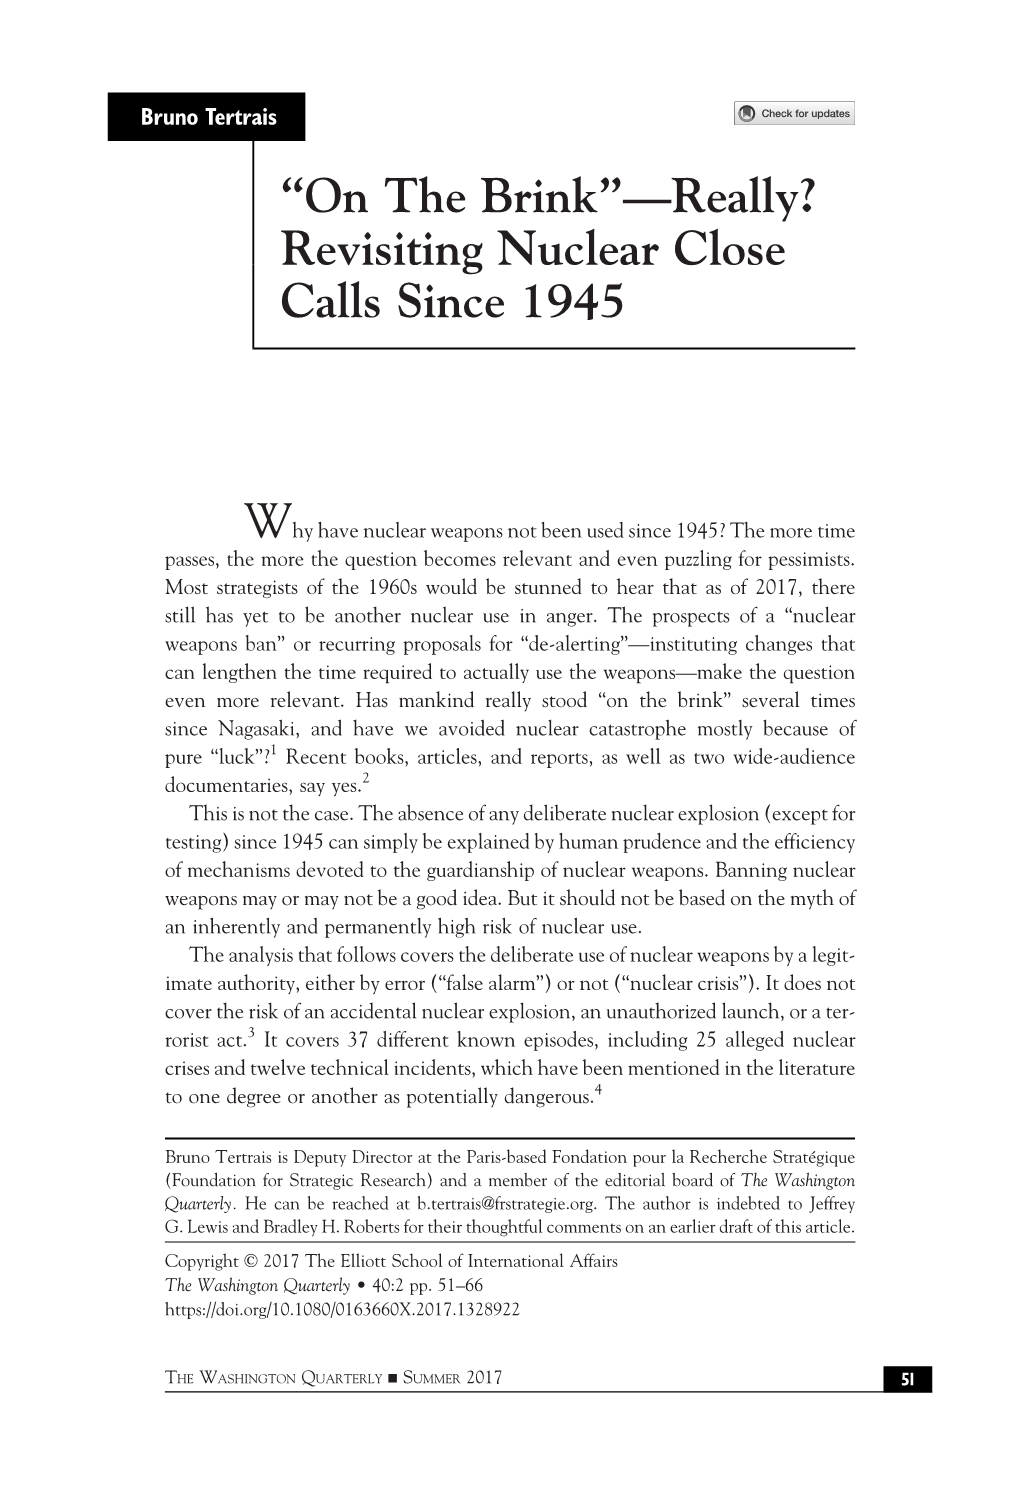 “On the Brink”—Really? Revisiting Nuclear Close Calls Since 1945